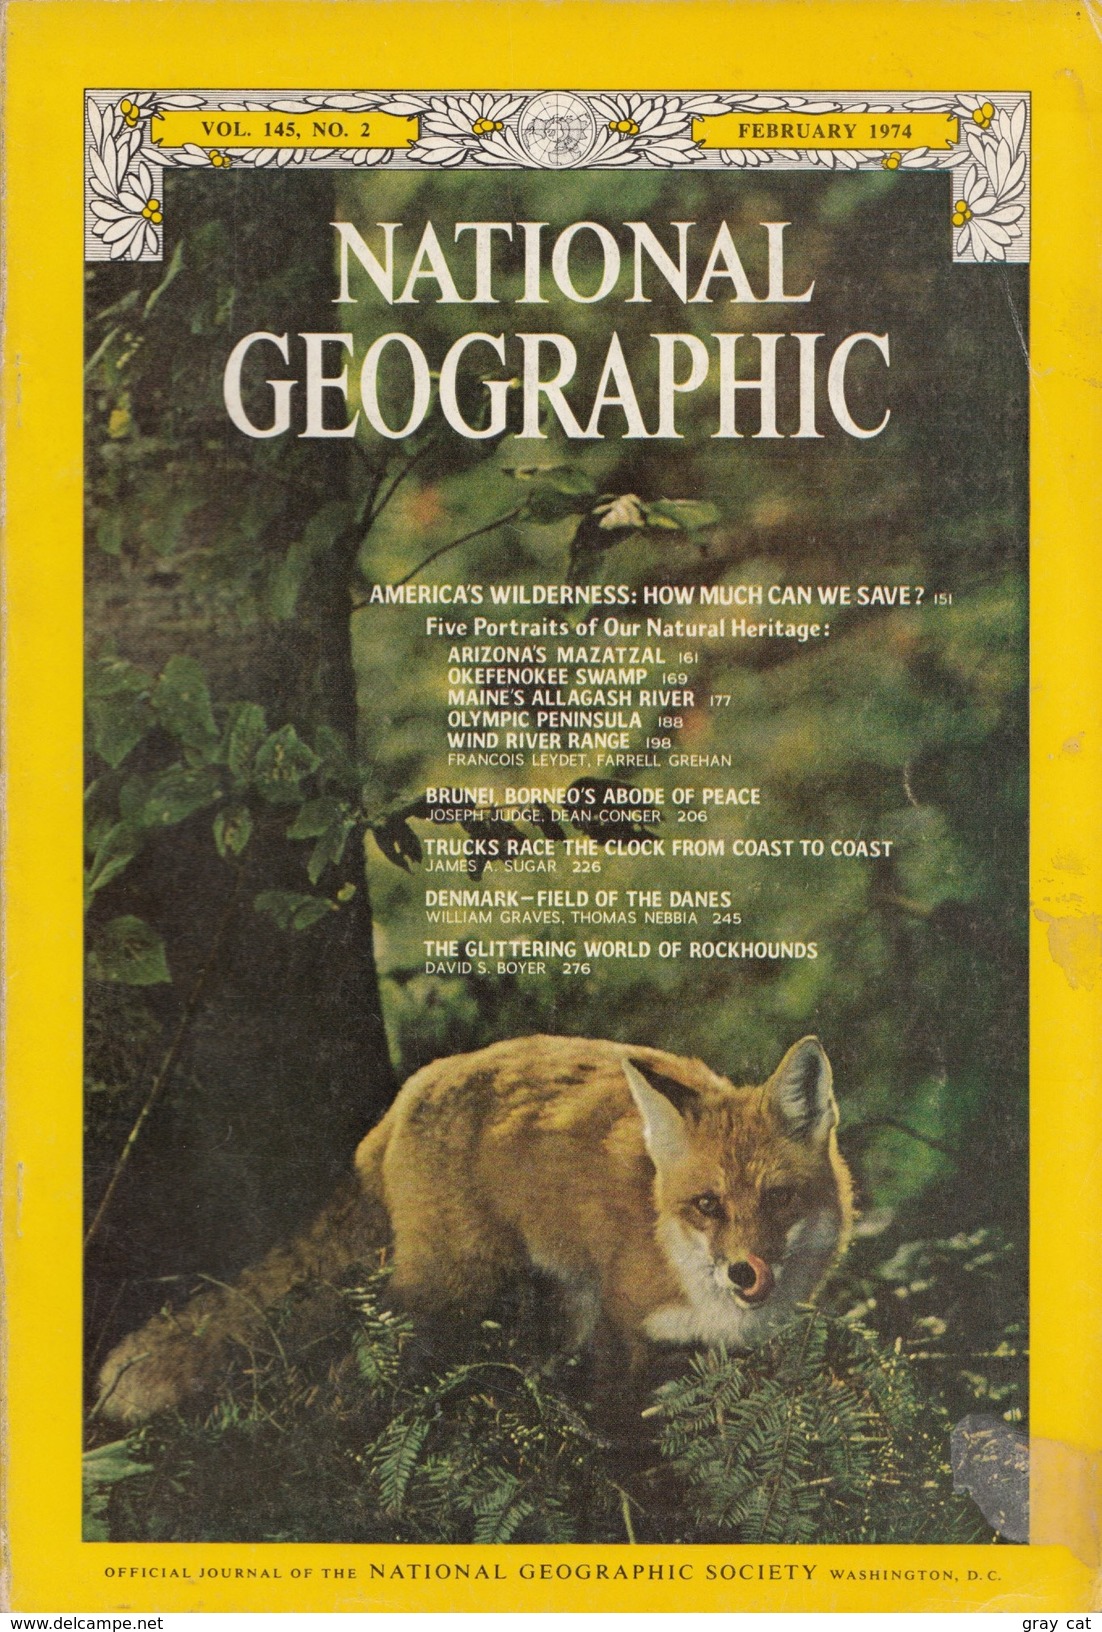 National Geographic Vol. 145, No. 2 February 1974 - Voyage/ Exploration